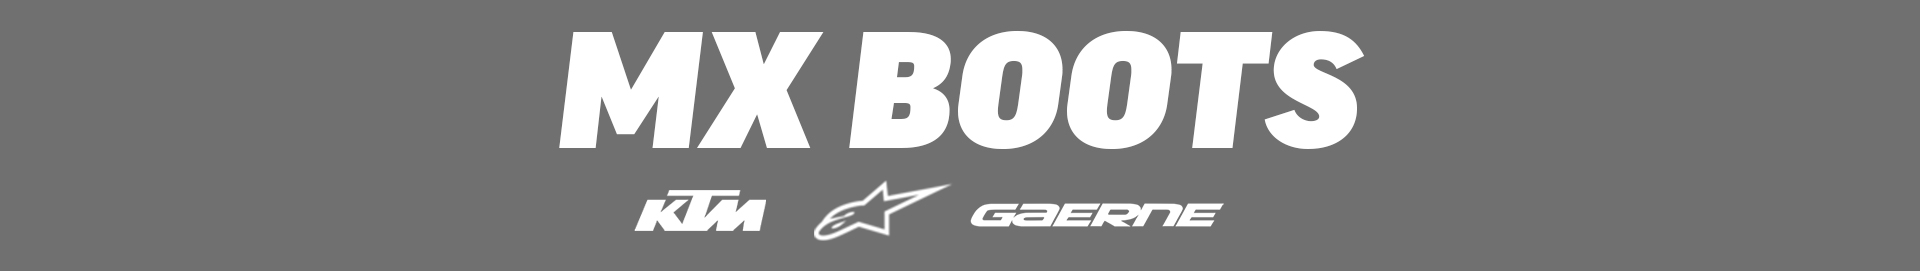 category-banner-mx-boots.jpg